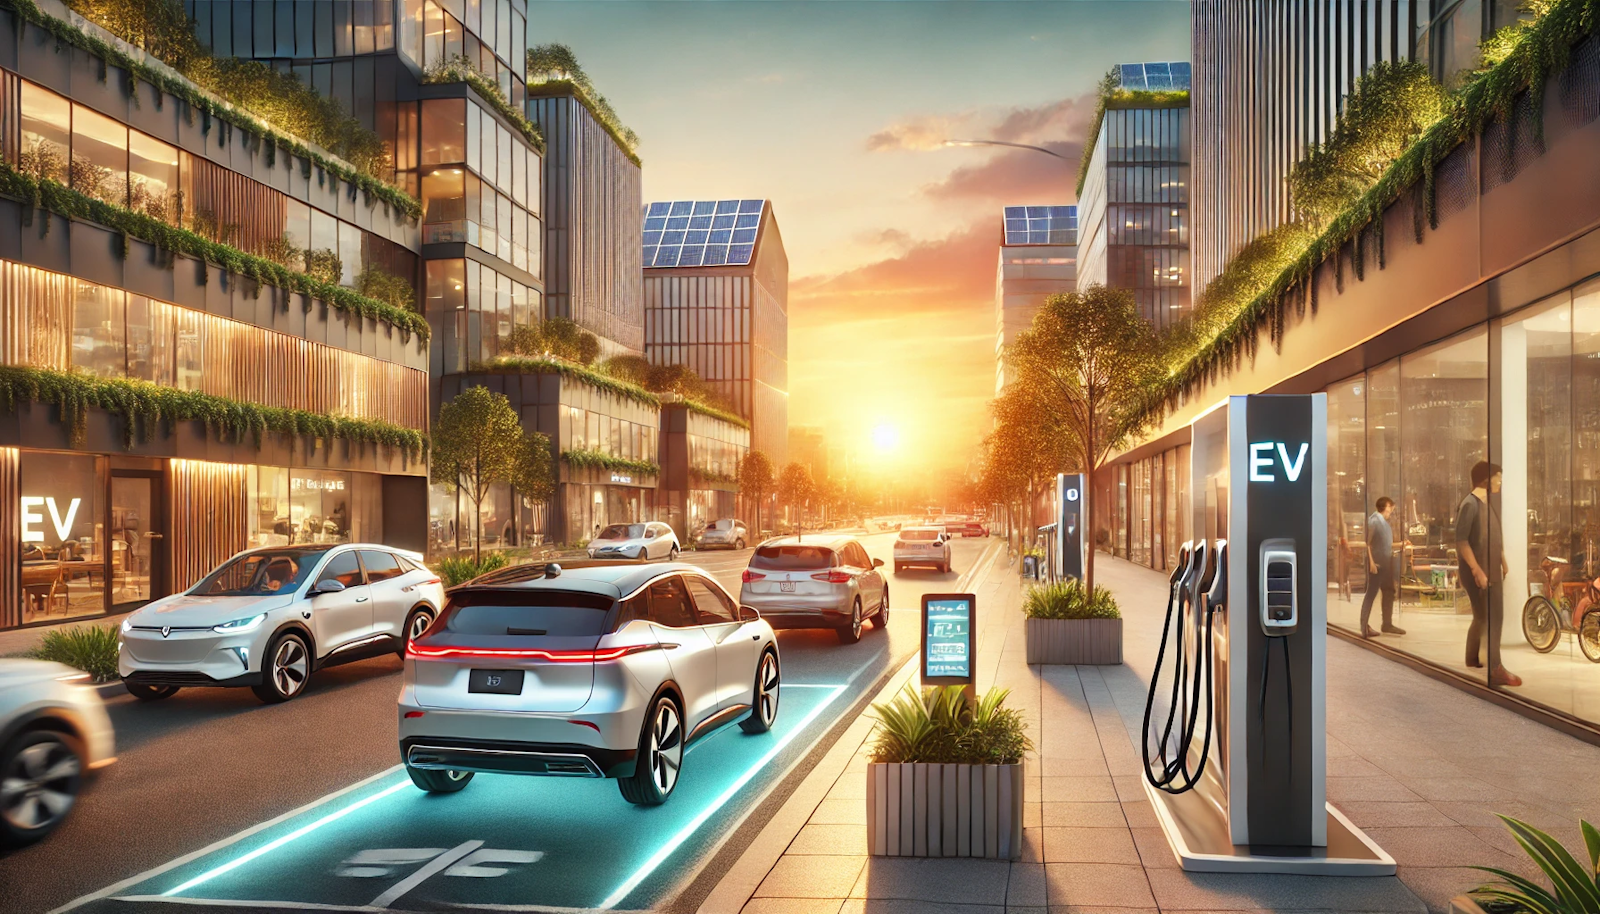 City street at sunset featuring an EV charging station, modern buildings with green technology, and pedestrians, showcasing sustainable urban living.